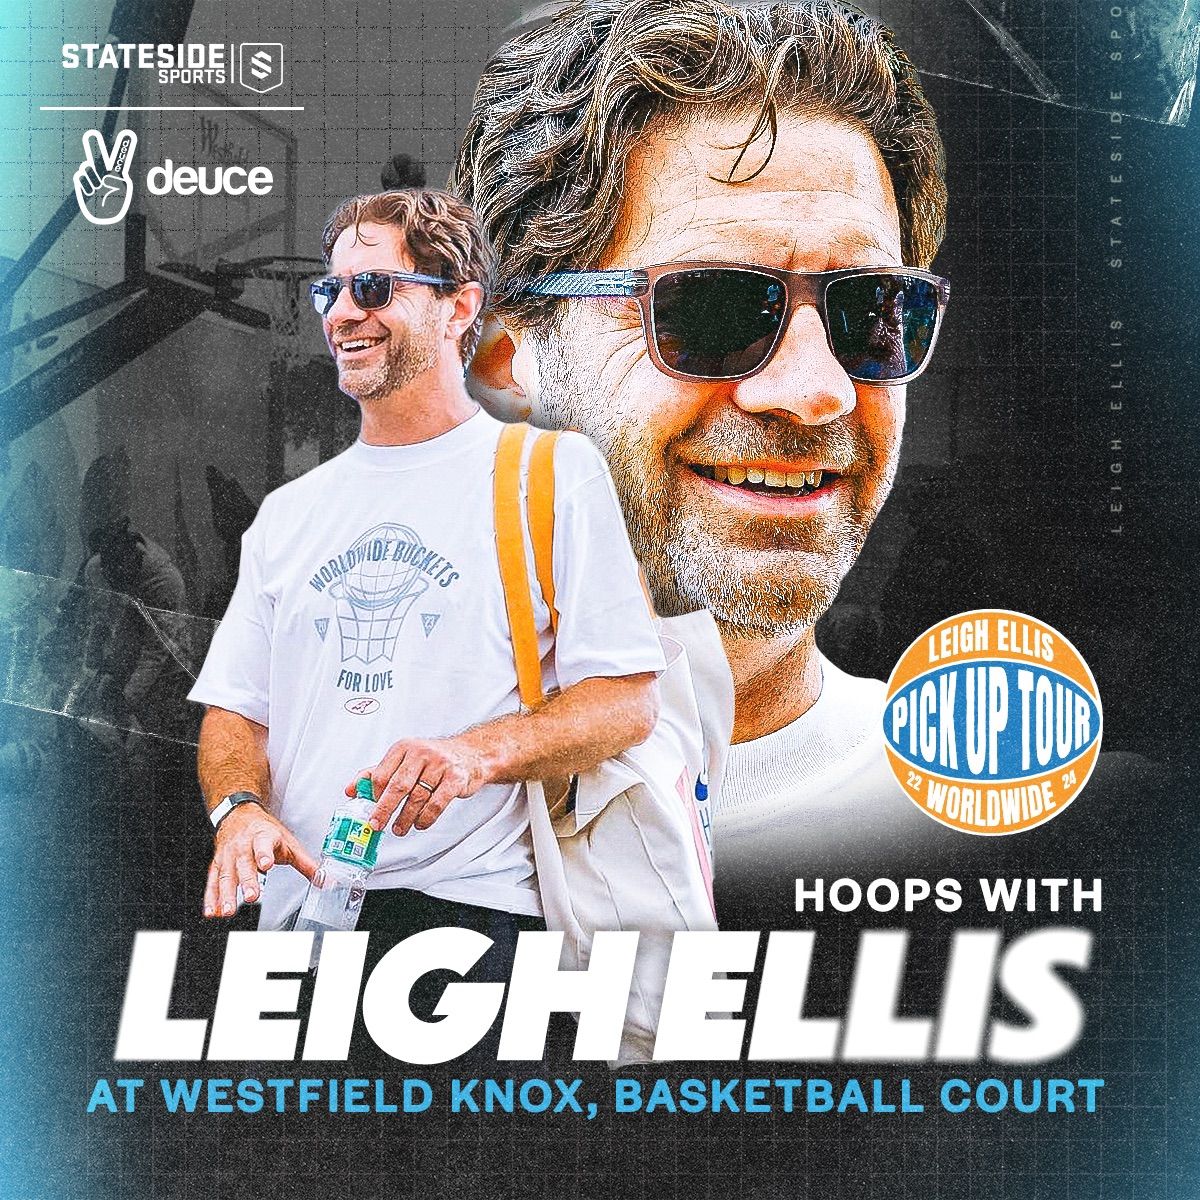 Hoops with Leigh Ellis in Collaboration with Stateside Sports & Deuce